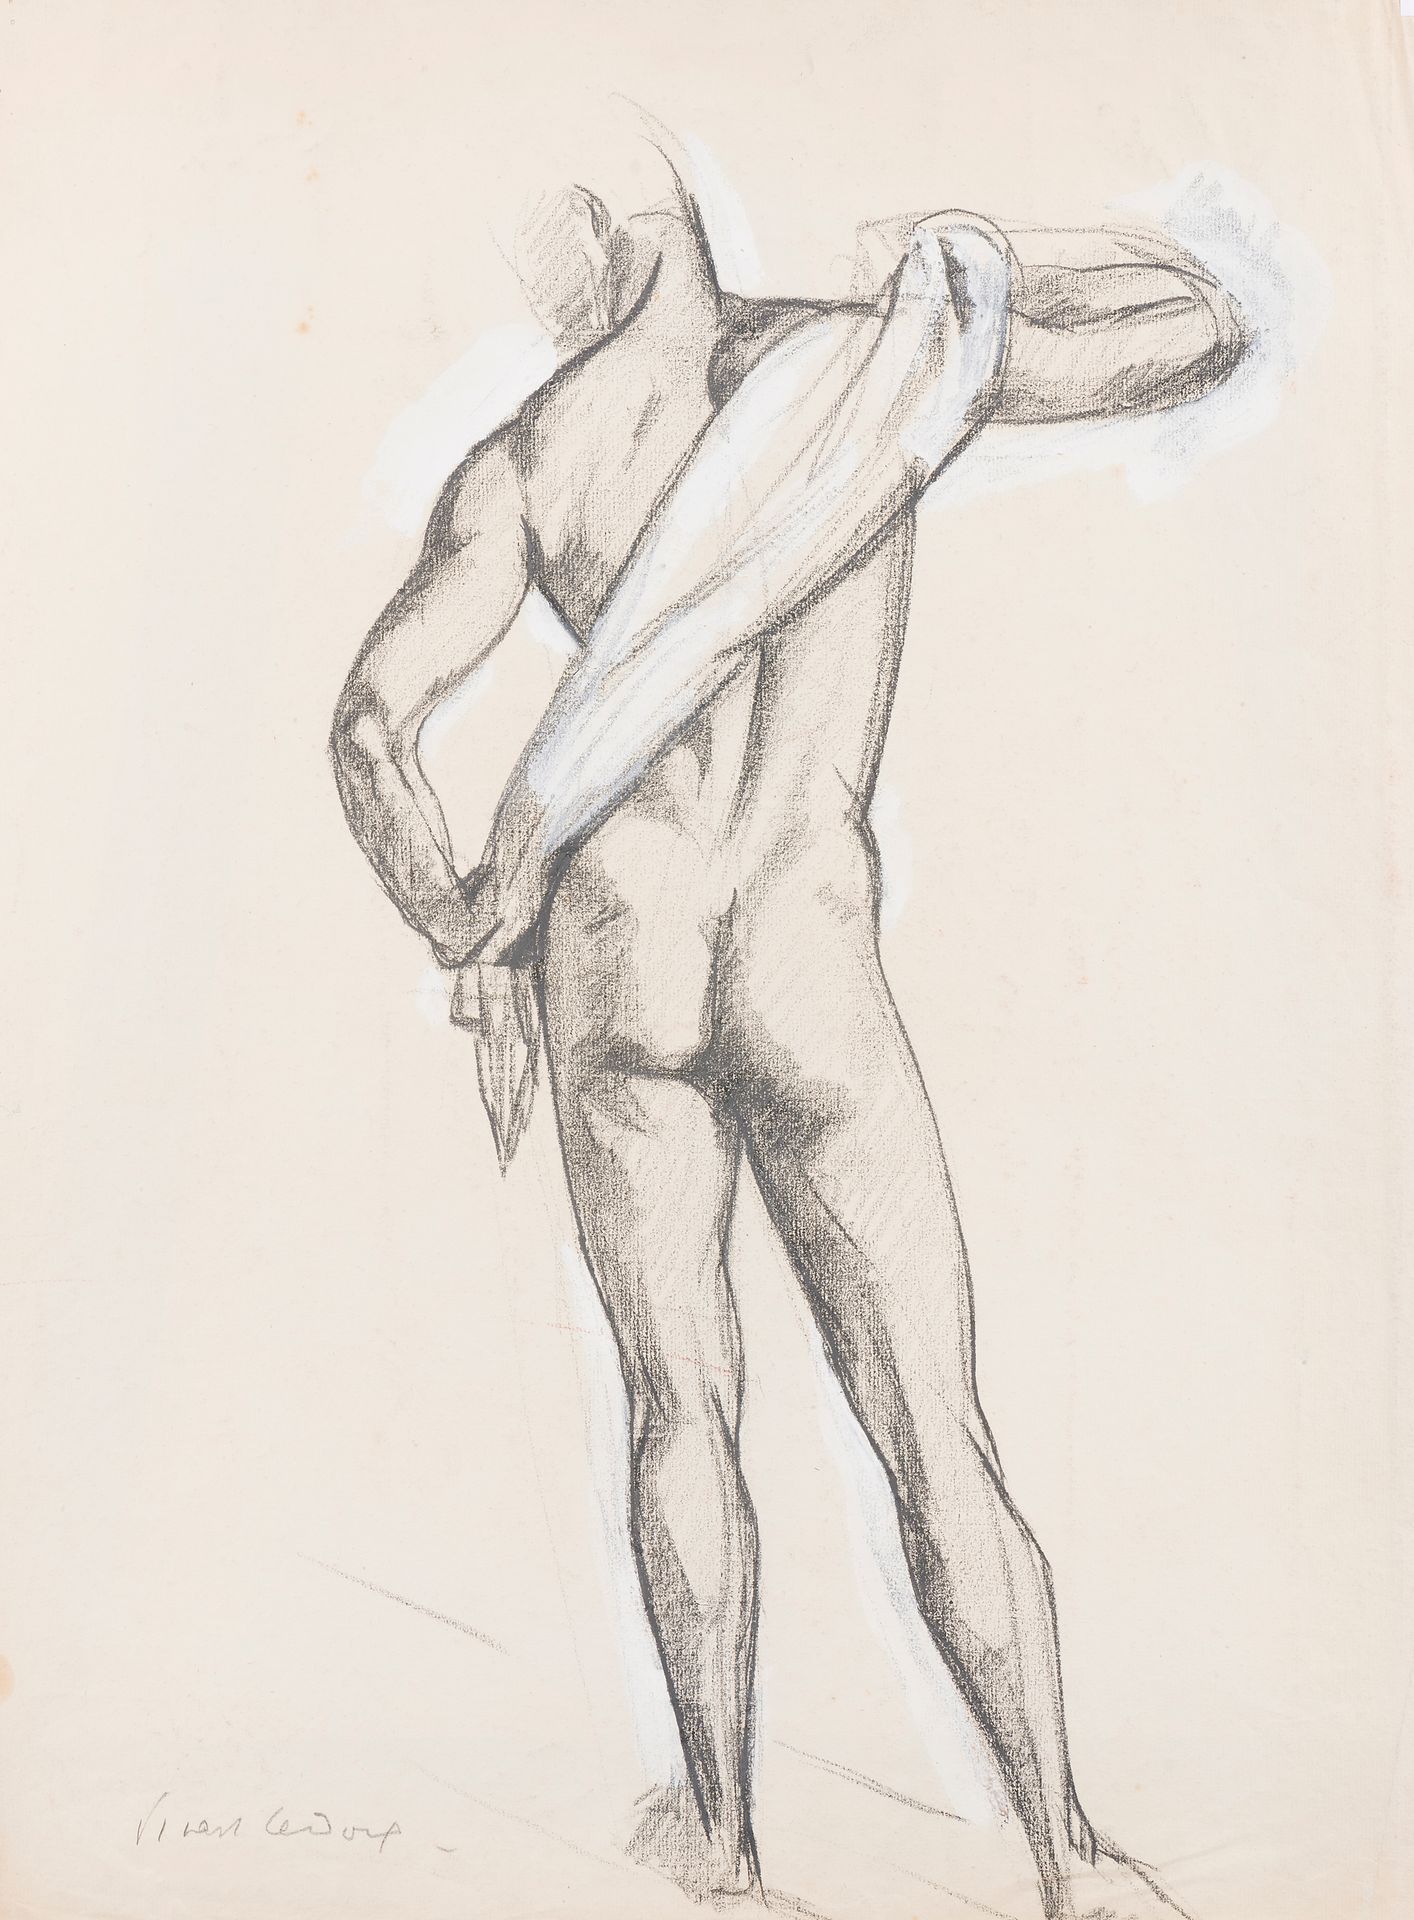 Null Charles PICART LE DOUX (1881-1959)
Naked man from behind, 1946
Charcoal and&hellip;